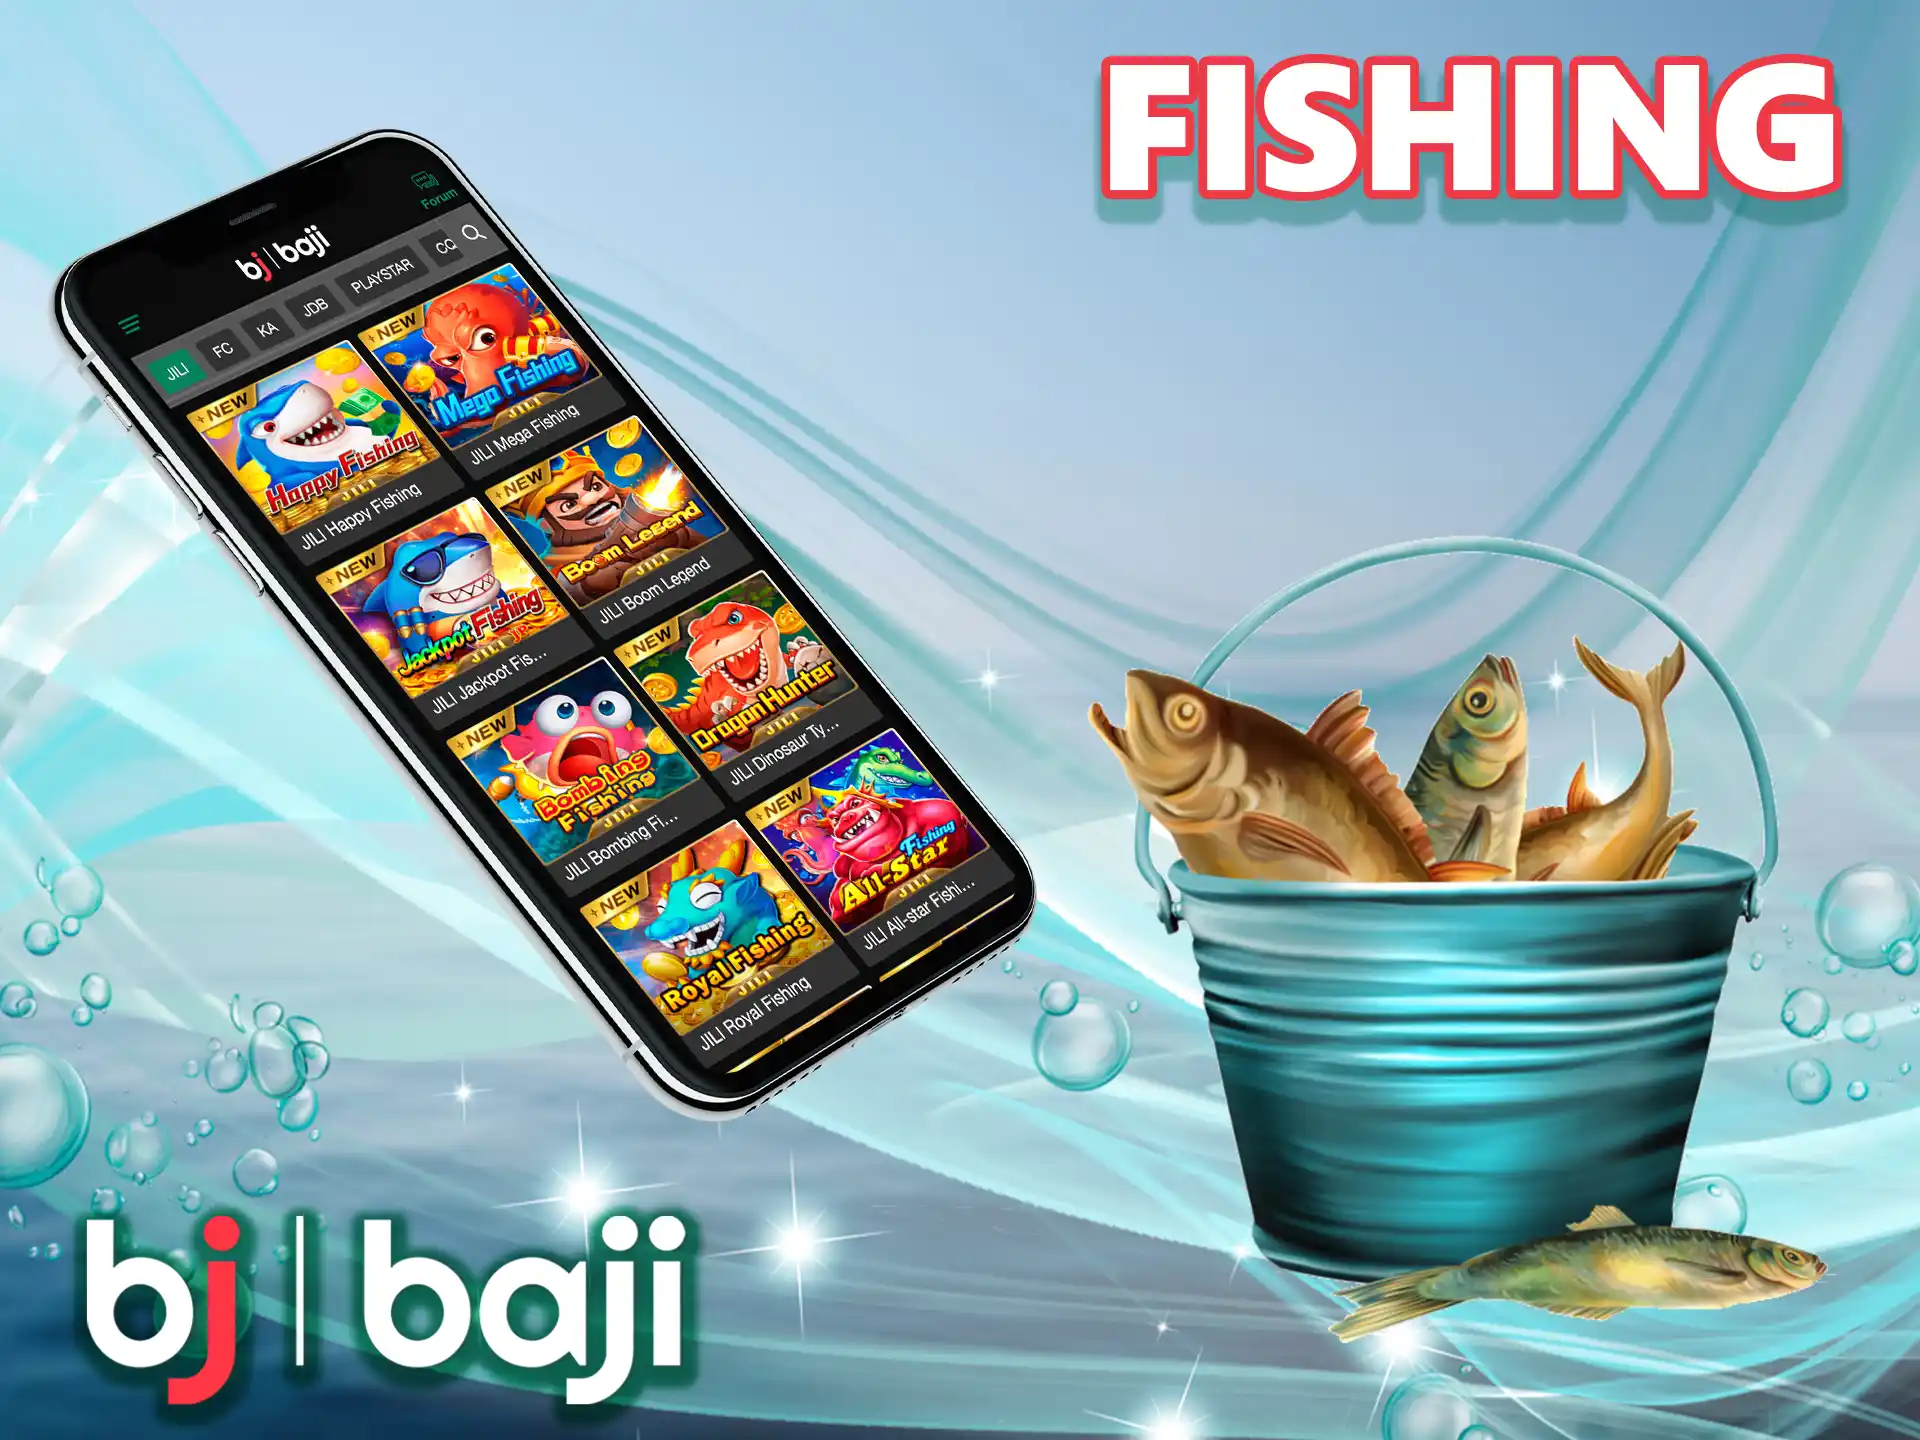 Fishermen will appreciate this section of games, catch different species of fish using the features of the Baji site.